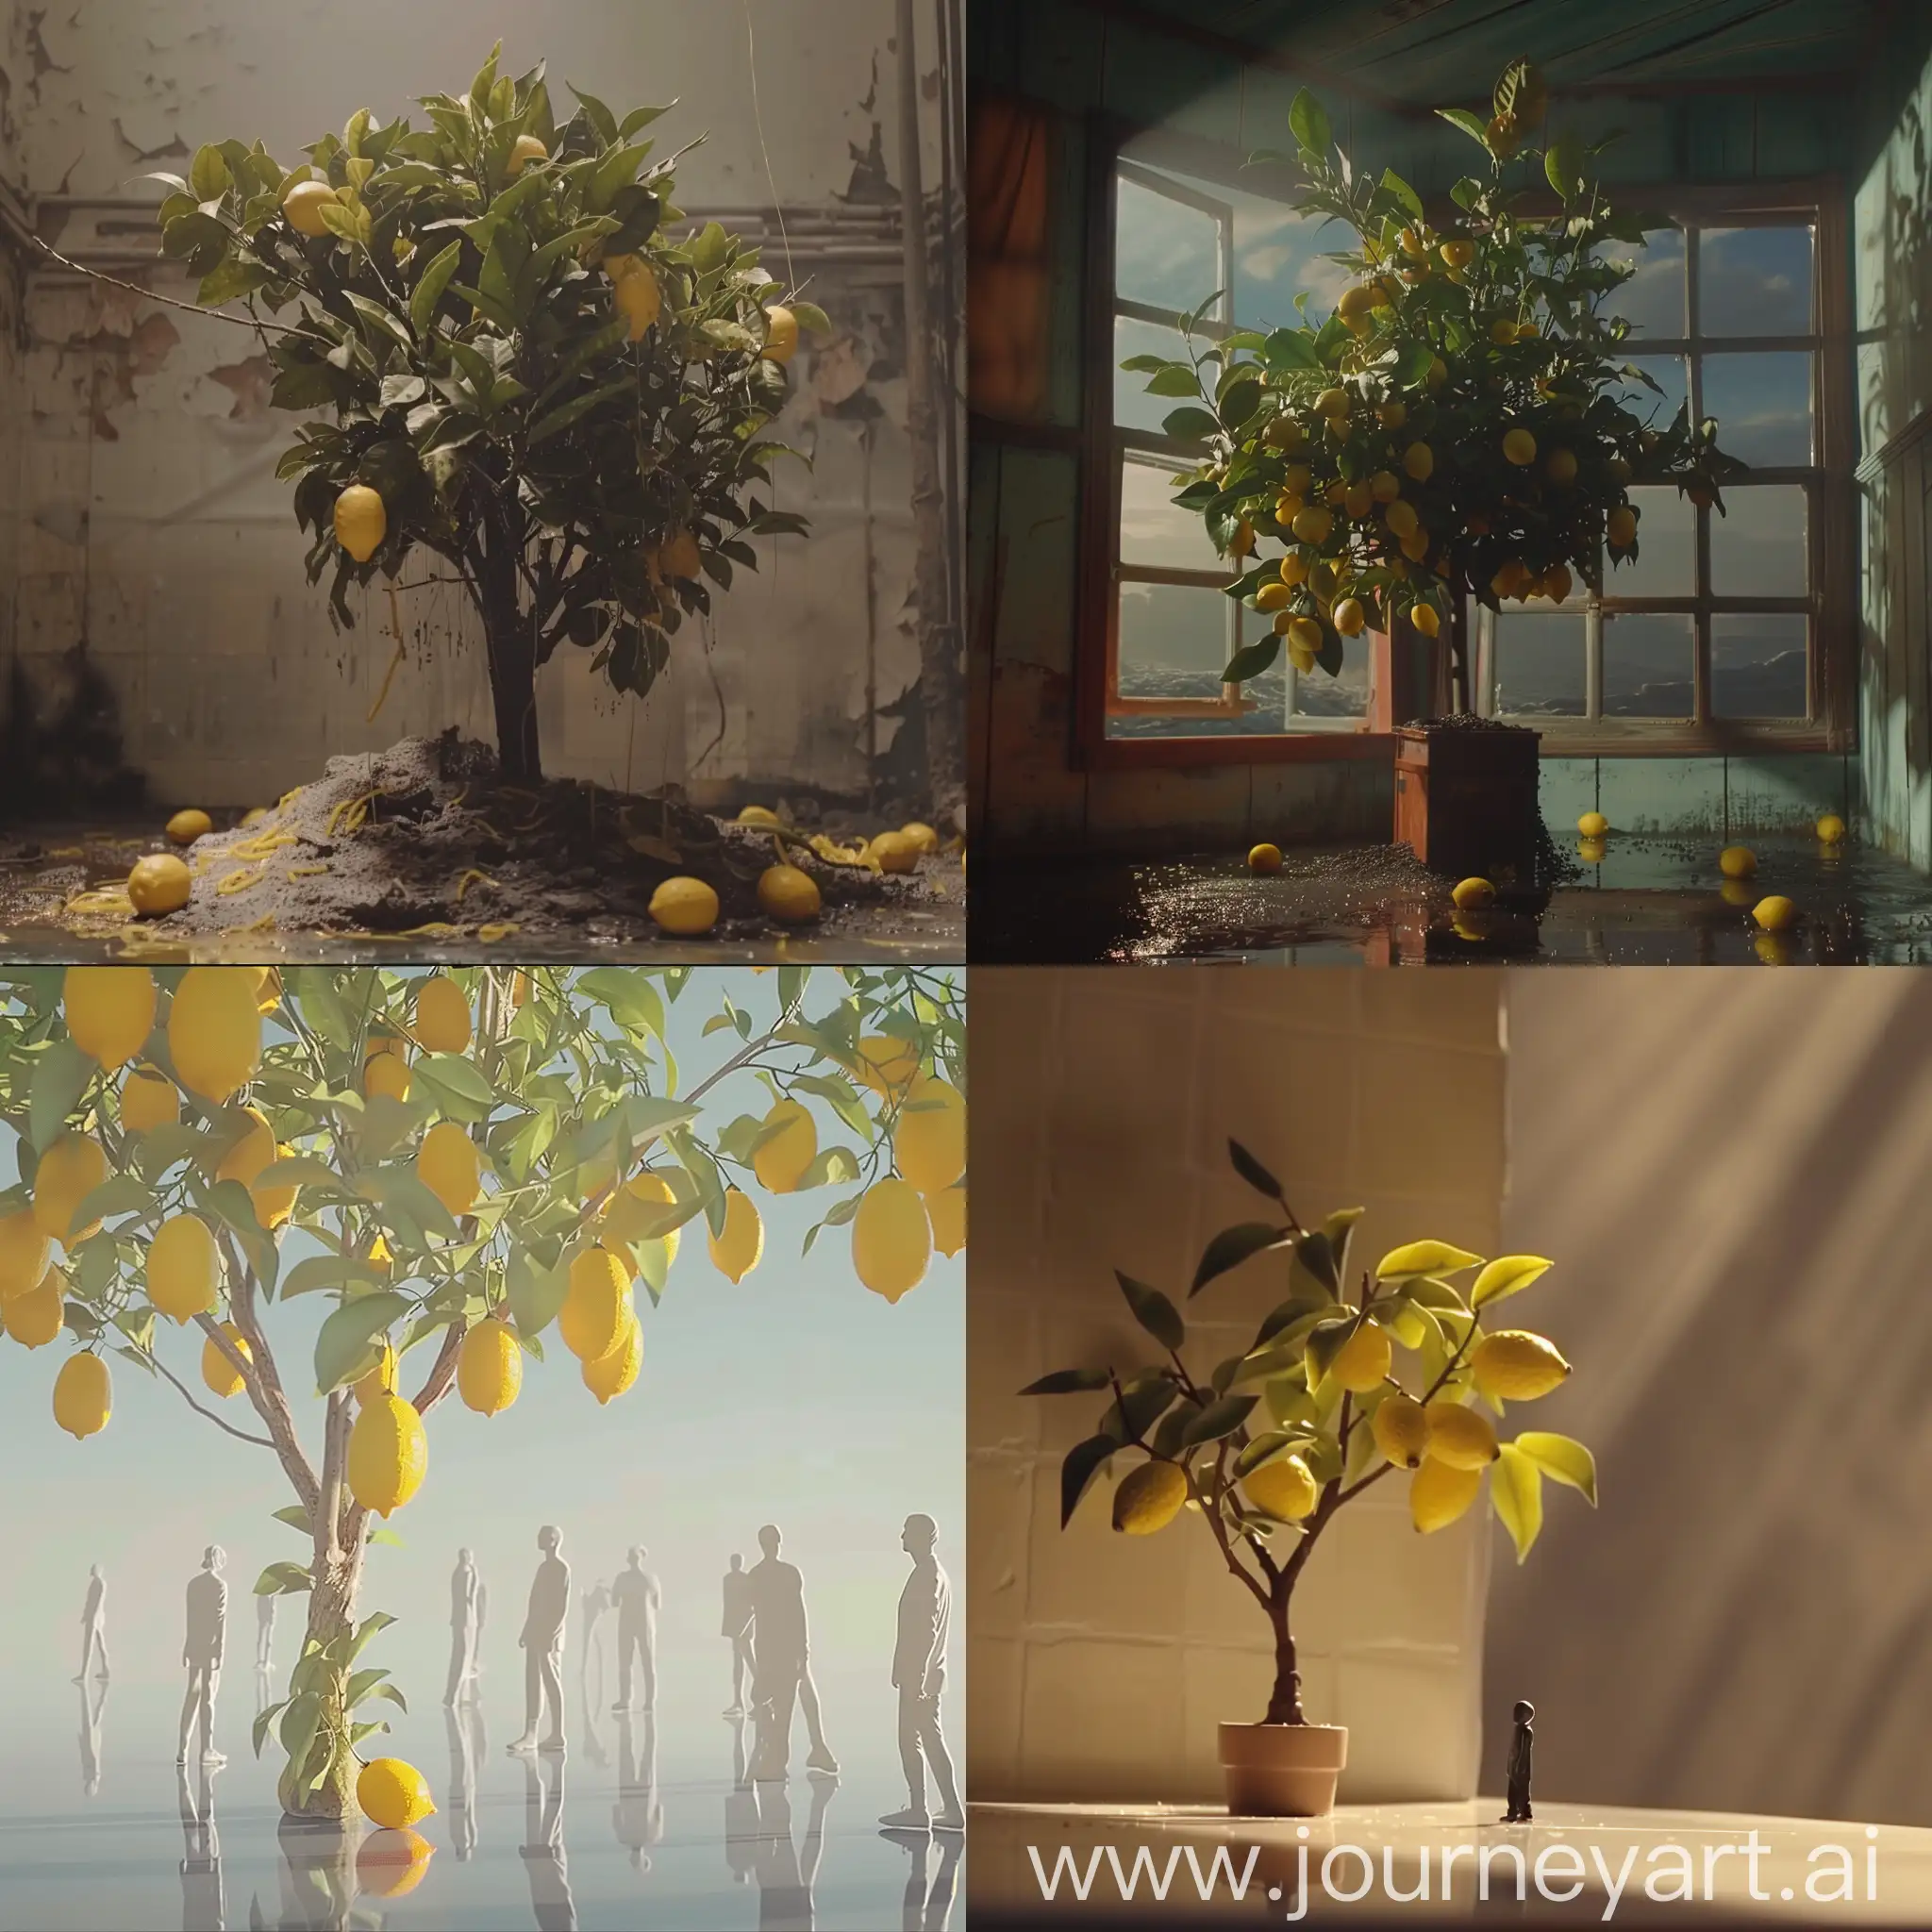 The video appears to show lyrics from a song that talk about boredom, loneliness, and the feeling of being stuck in a routine with no significant changes. The lyrics mention the feeling of waiting for someone without anything special happening, the desire for change and reflection on what you see around you, such as a yellow lemon tree symbolic of the monotony of everyday life. The word "isolation" is repeated several times